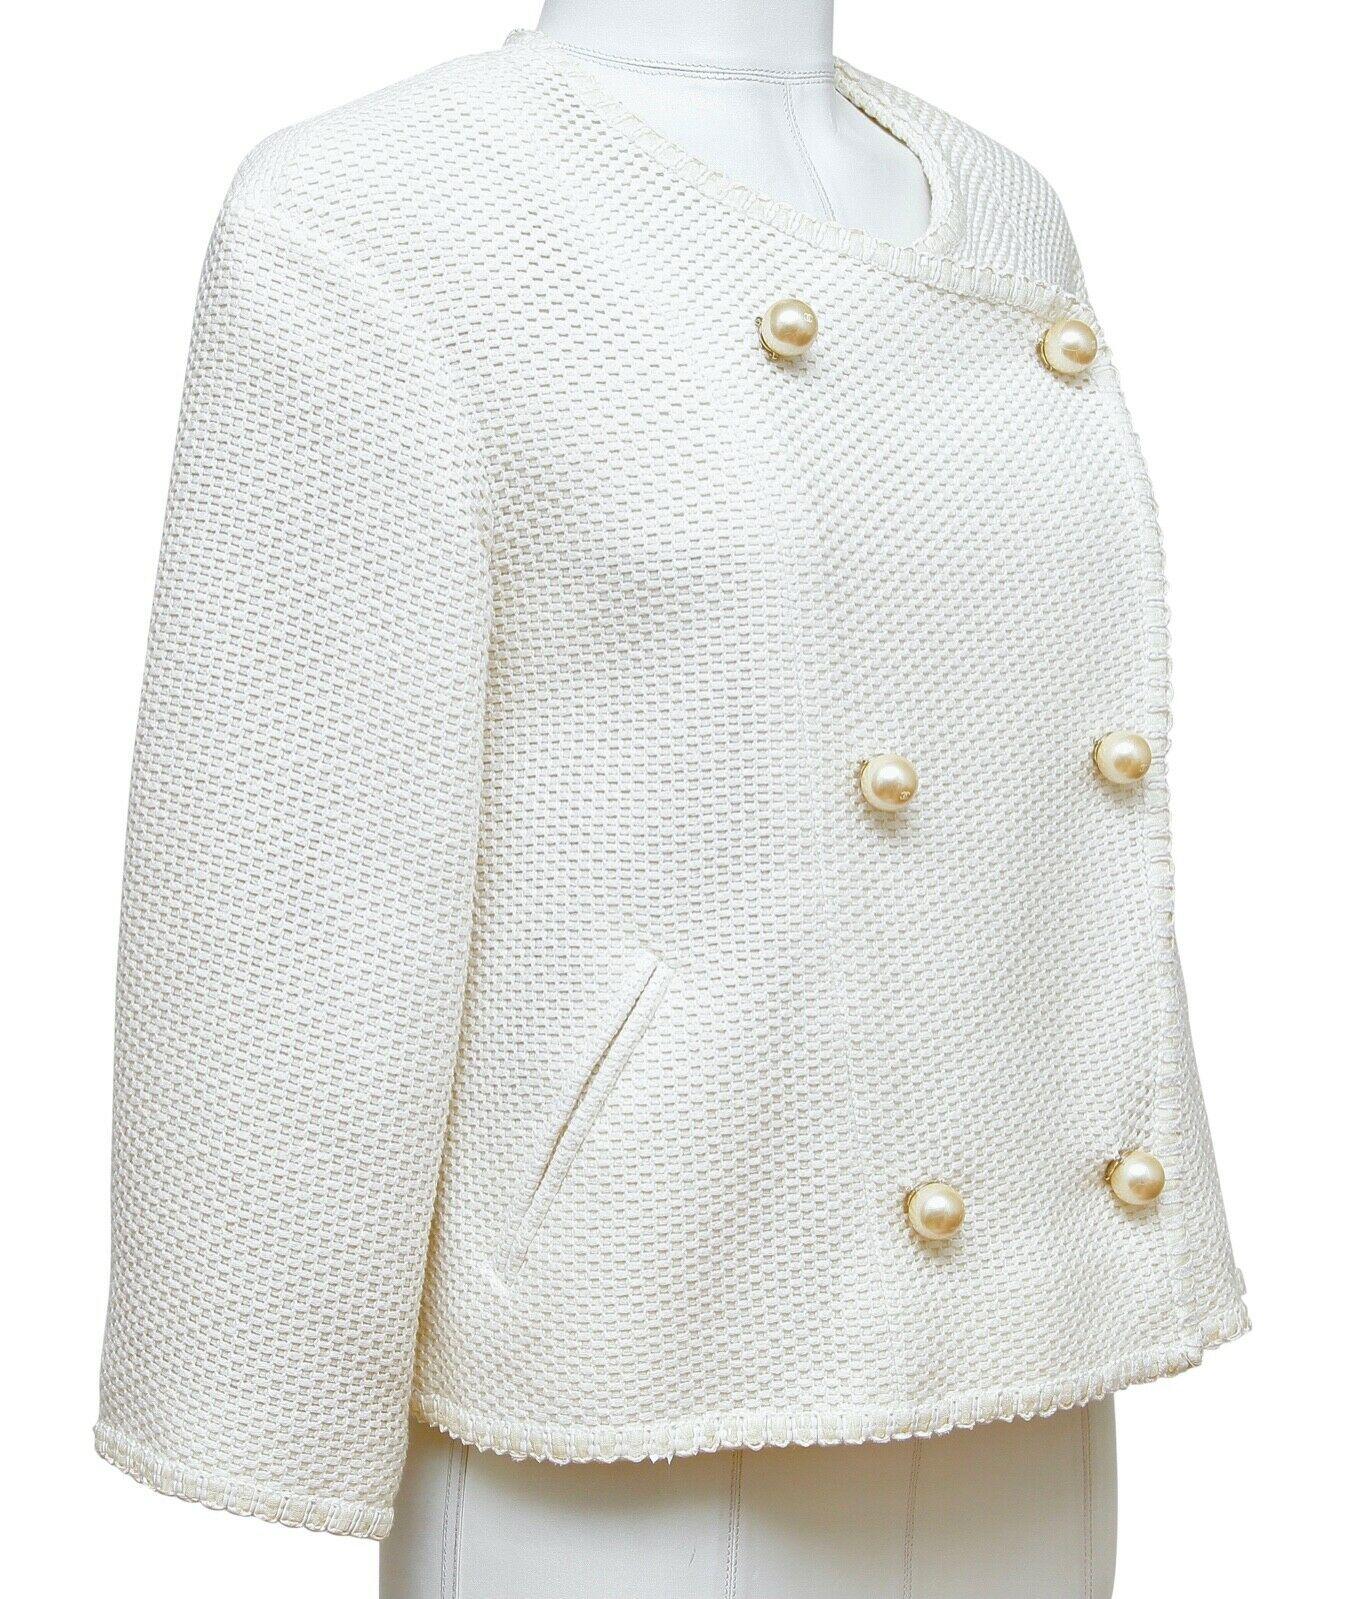 GUARANTEED AUTHENTIC CHANEL 2013 SPRING COLLECTION EXQUISITE WHITE TWEED JACKET W/FAUX PEARLS

Retailed excluding sales taxes $4,920
Details:
• Signature cut and fit on this unique white double breasted jacket closure.
• Faux pearl buttons, actual